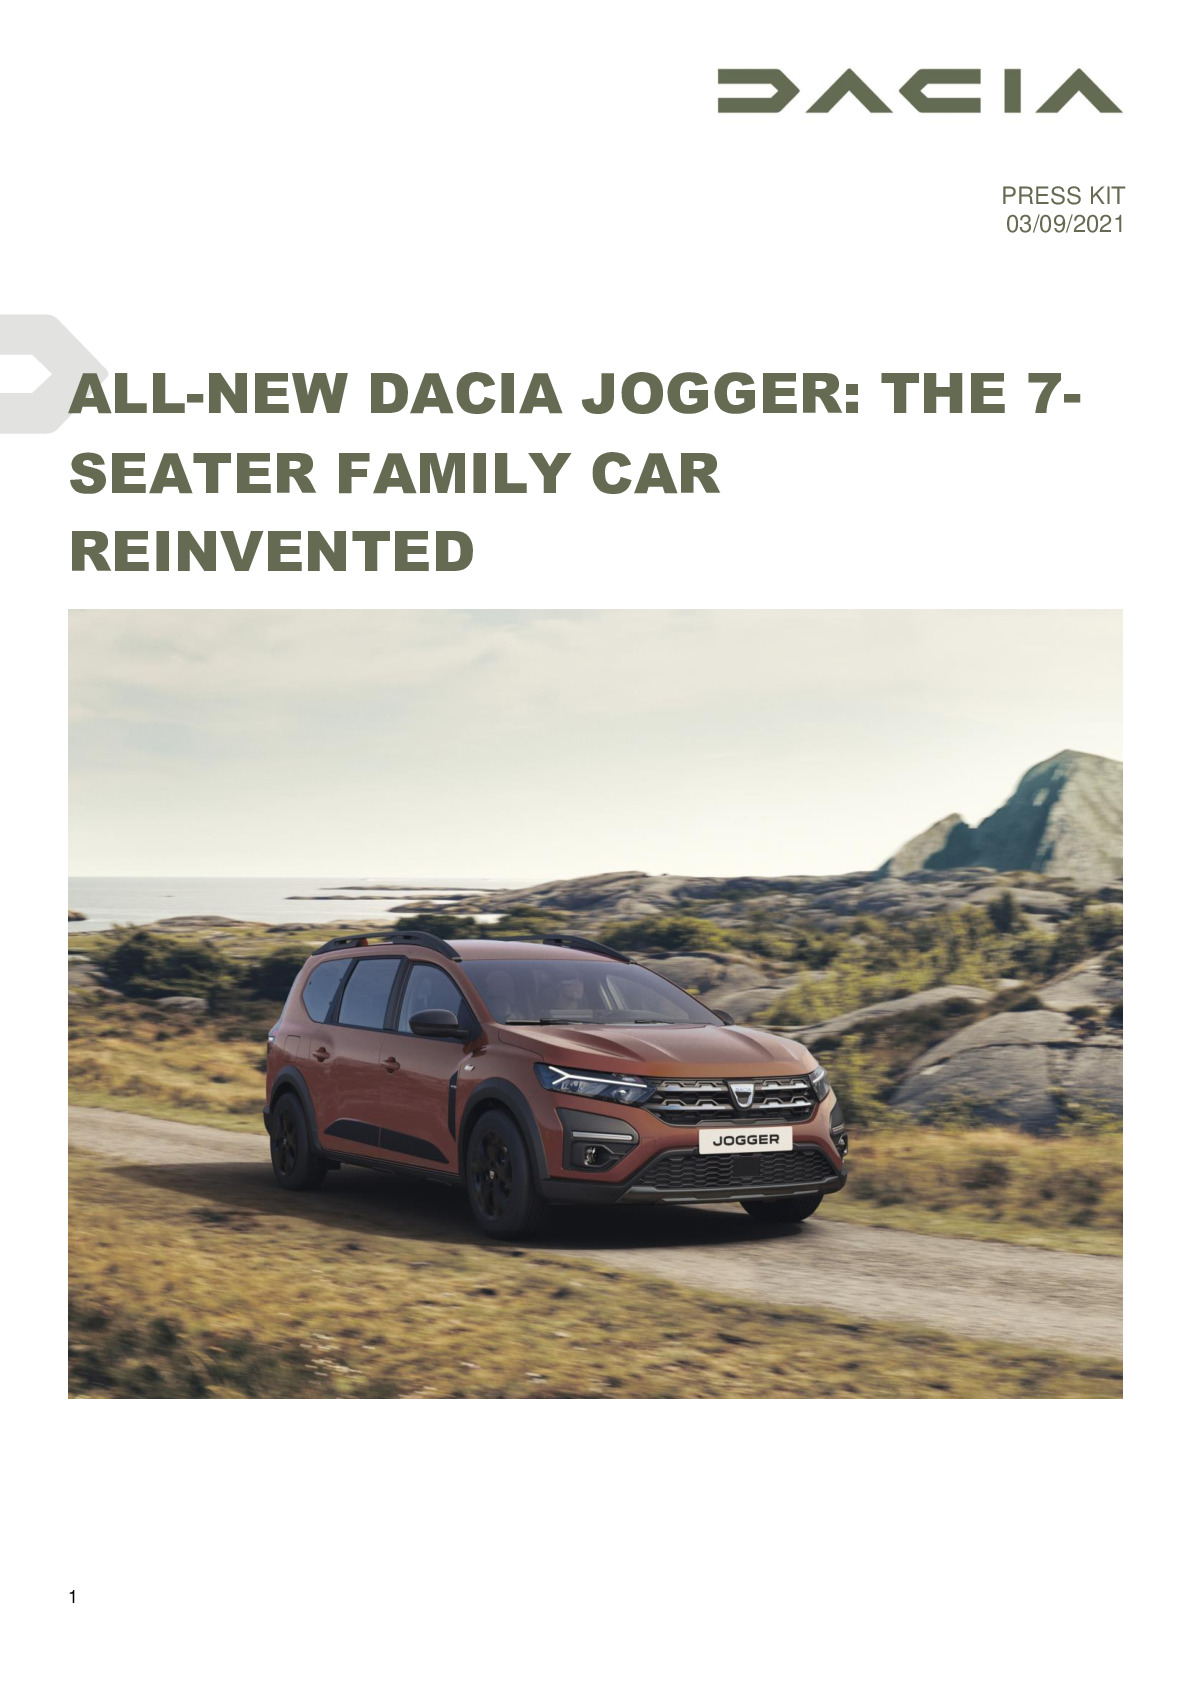 Renault's Dacia has launched a New 7-Seater MUV, Jogger